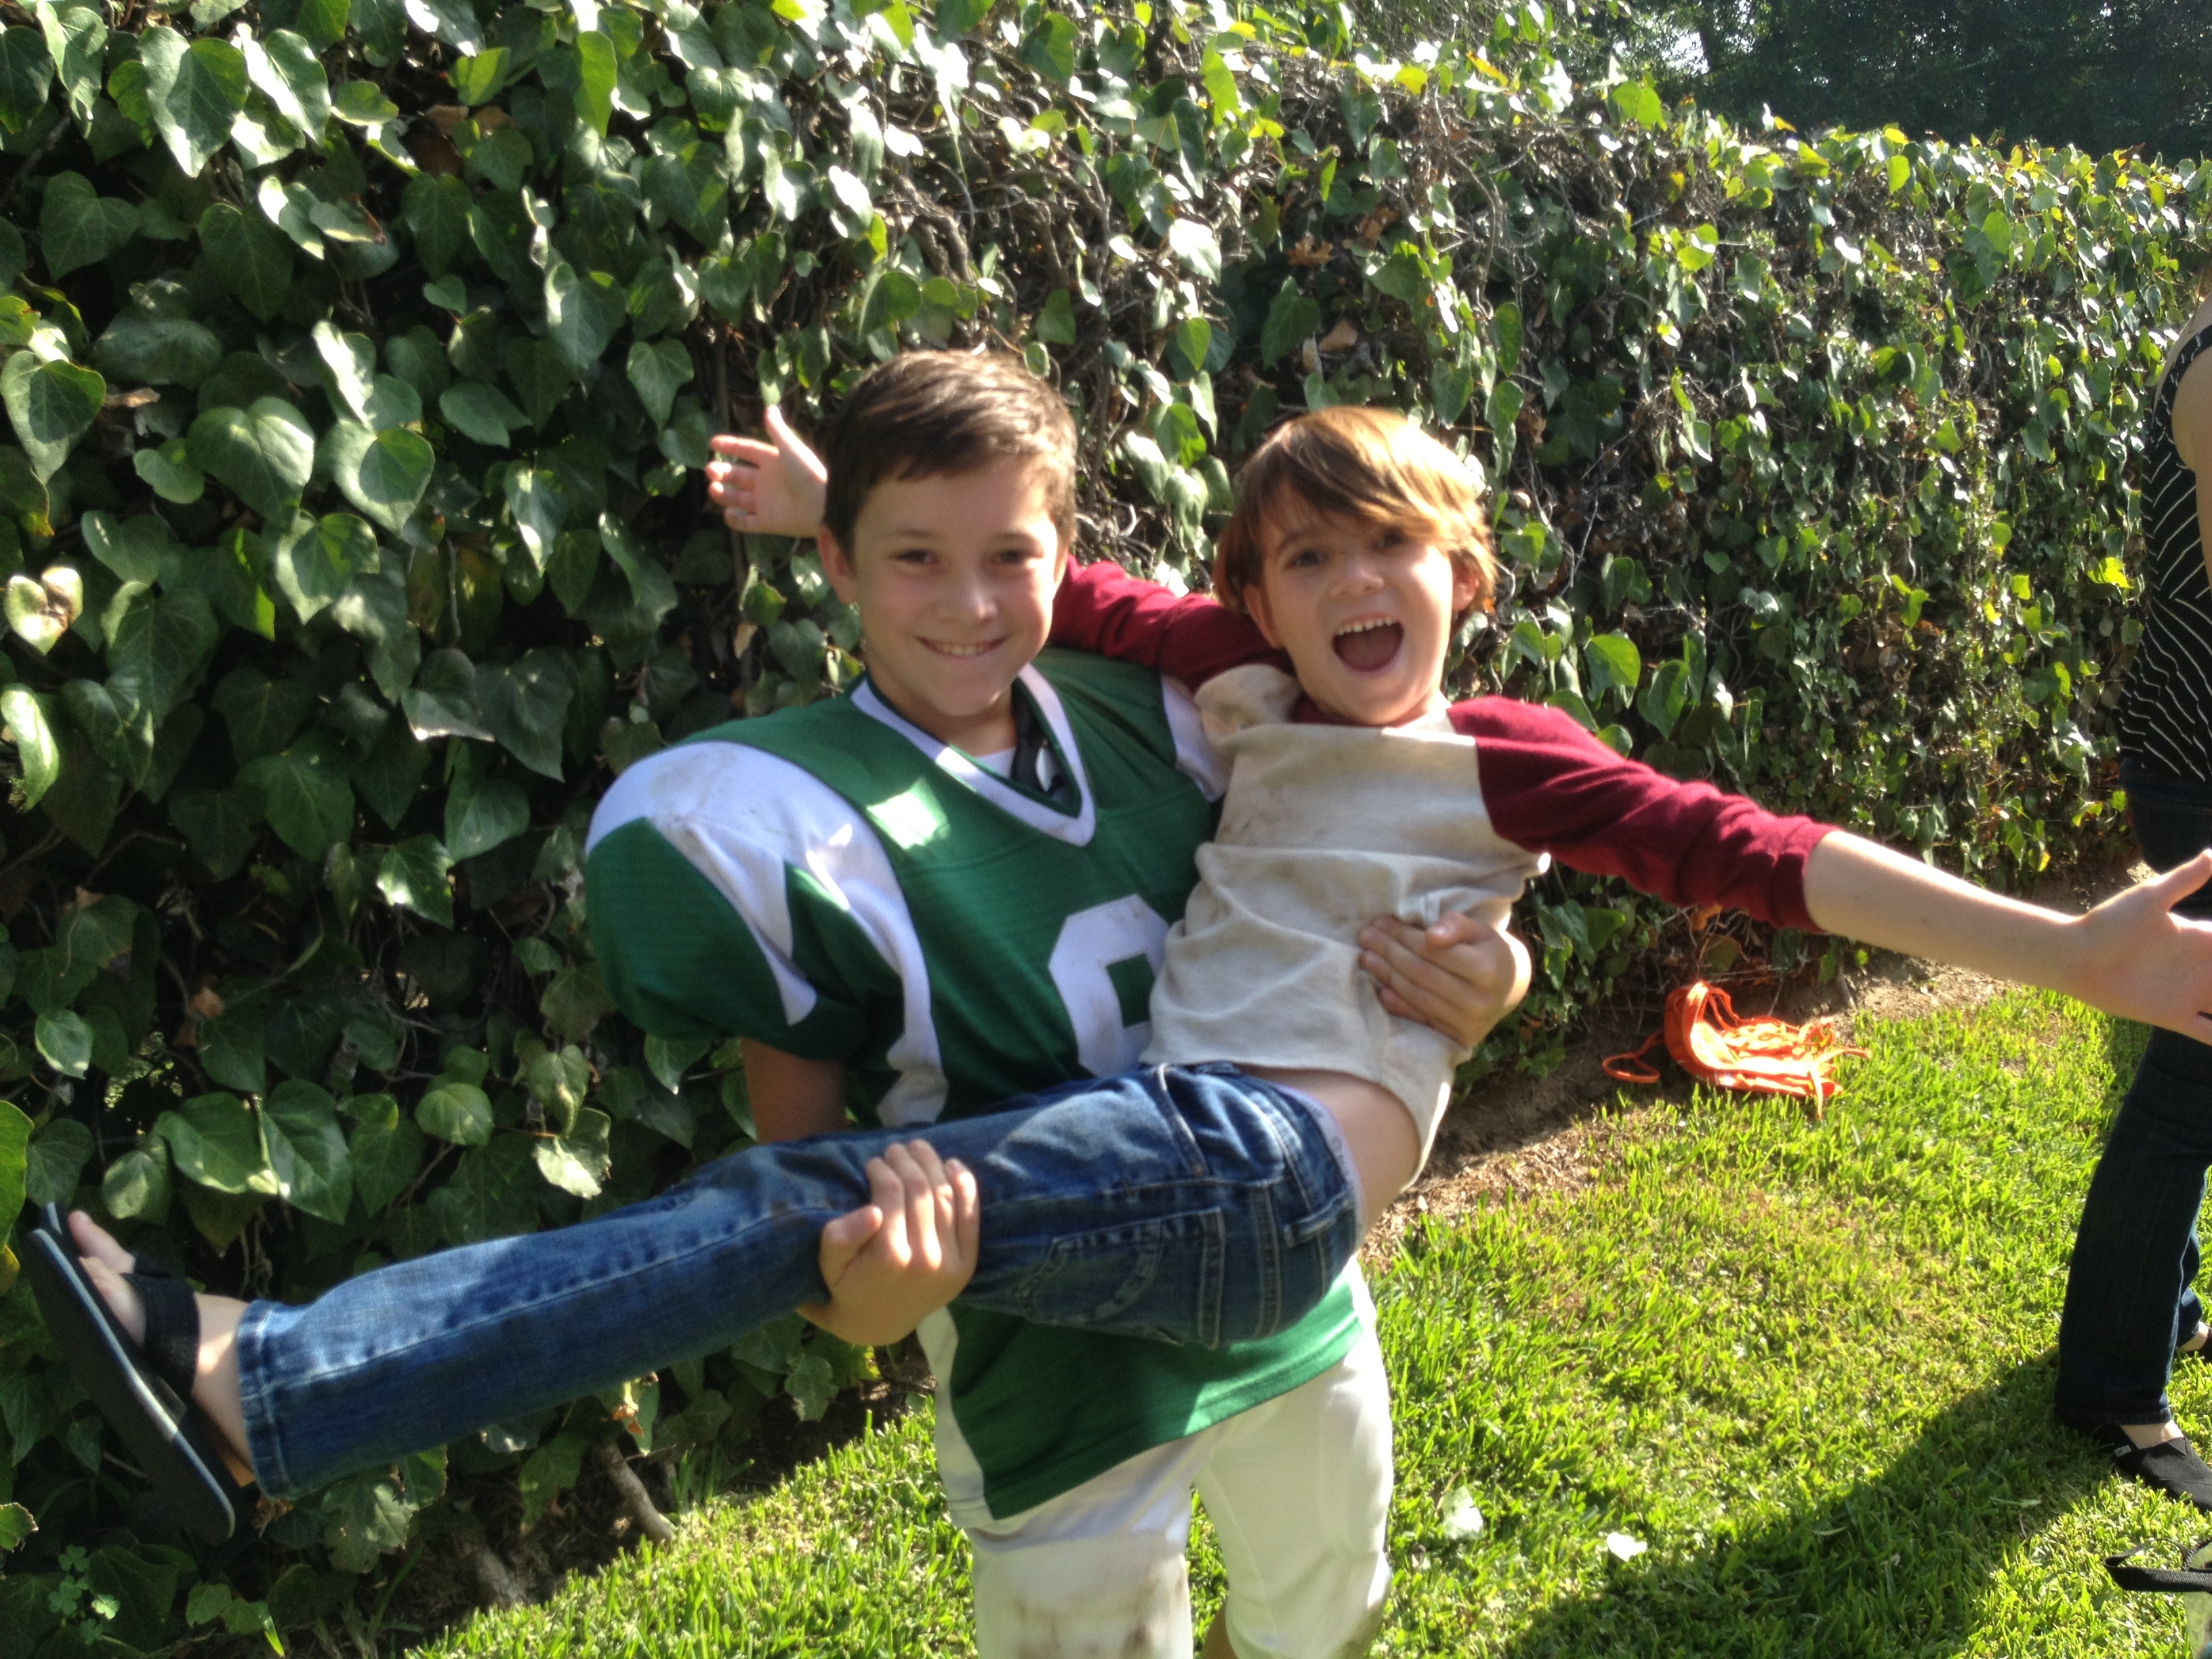 Griffin Cleveland and Aiden Lovecamp on the set of Home Depot commercial. http://www.youtube.com/watch?v=wKAr1rryQik